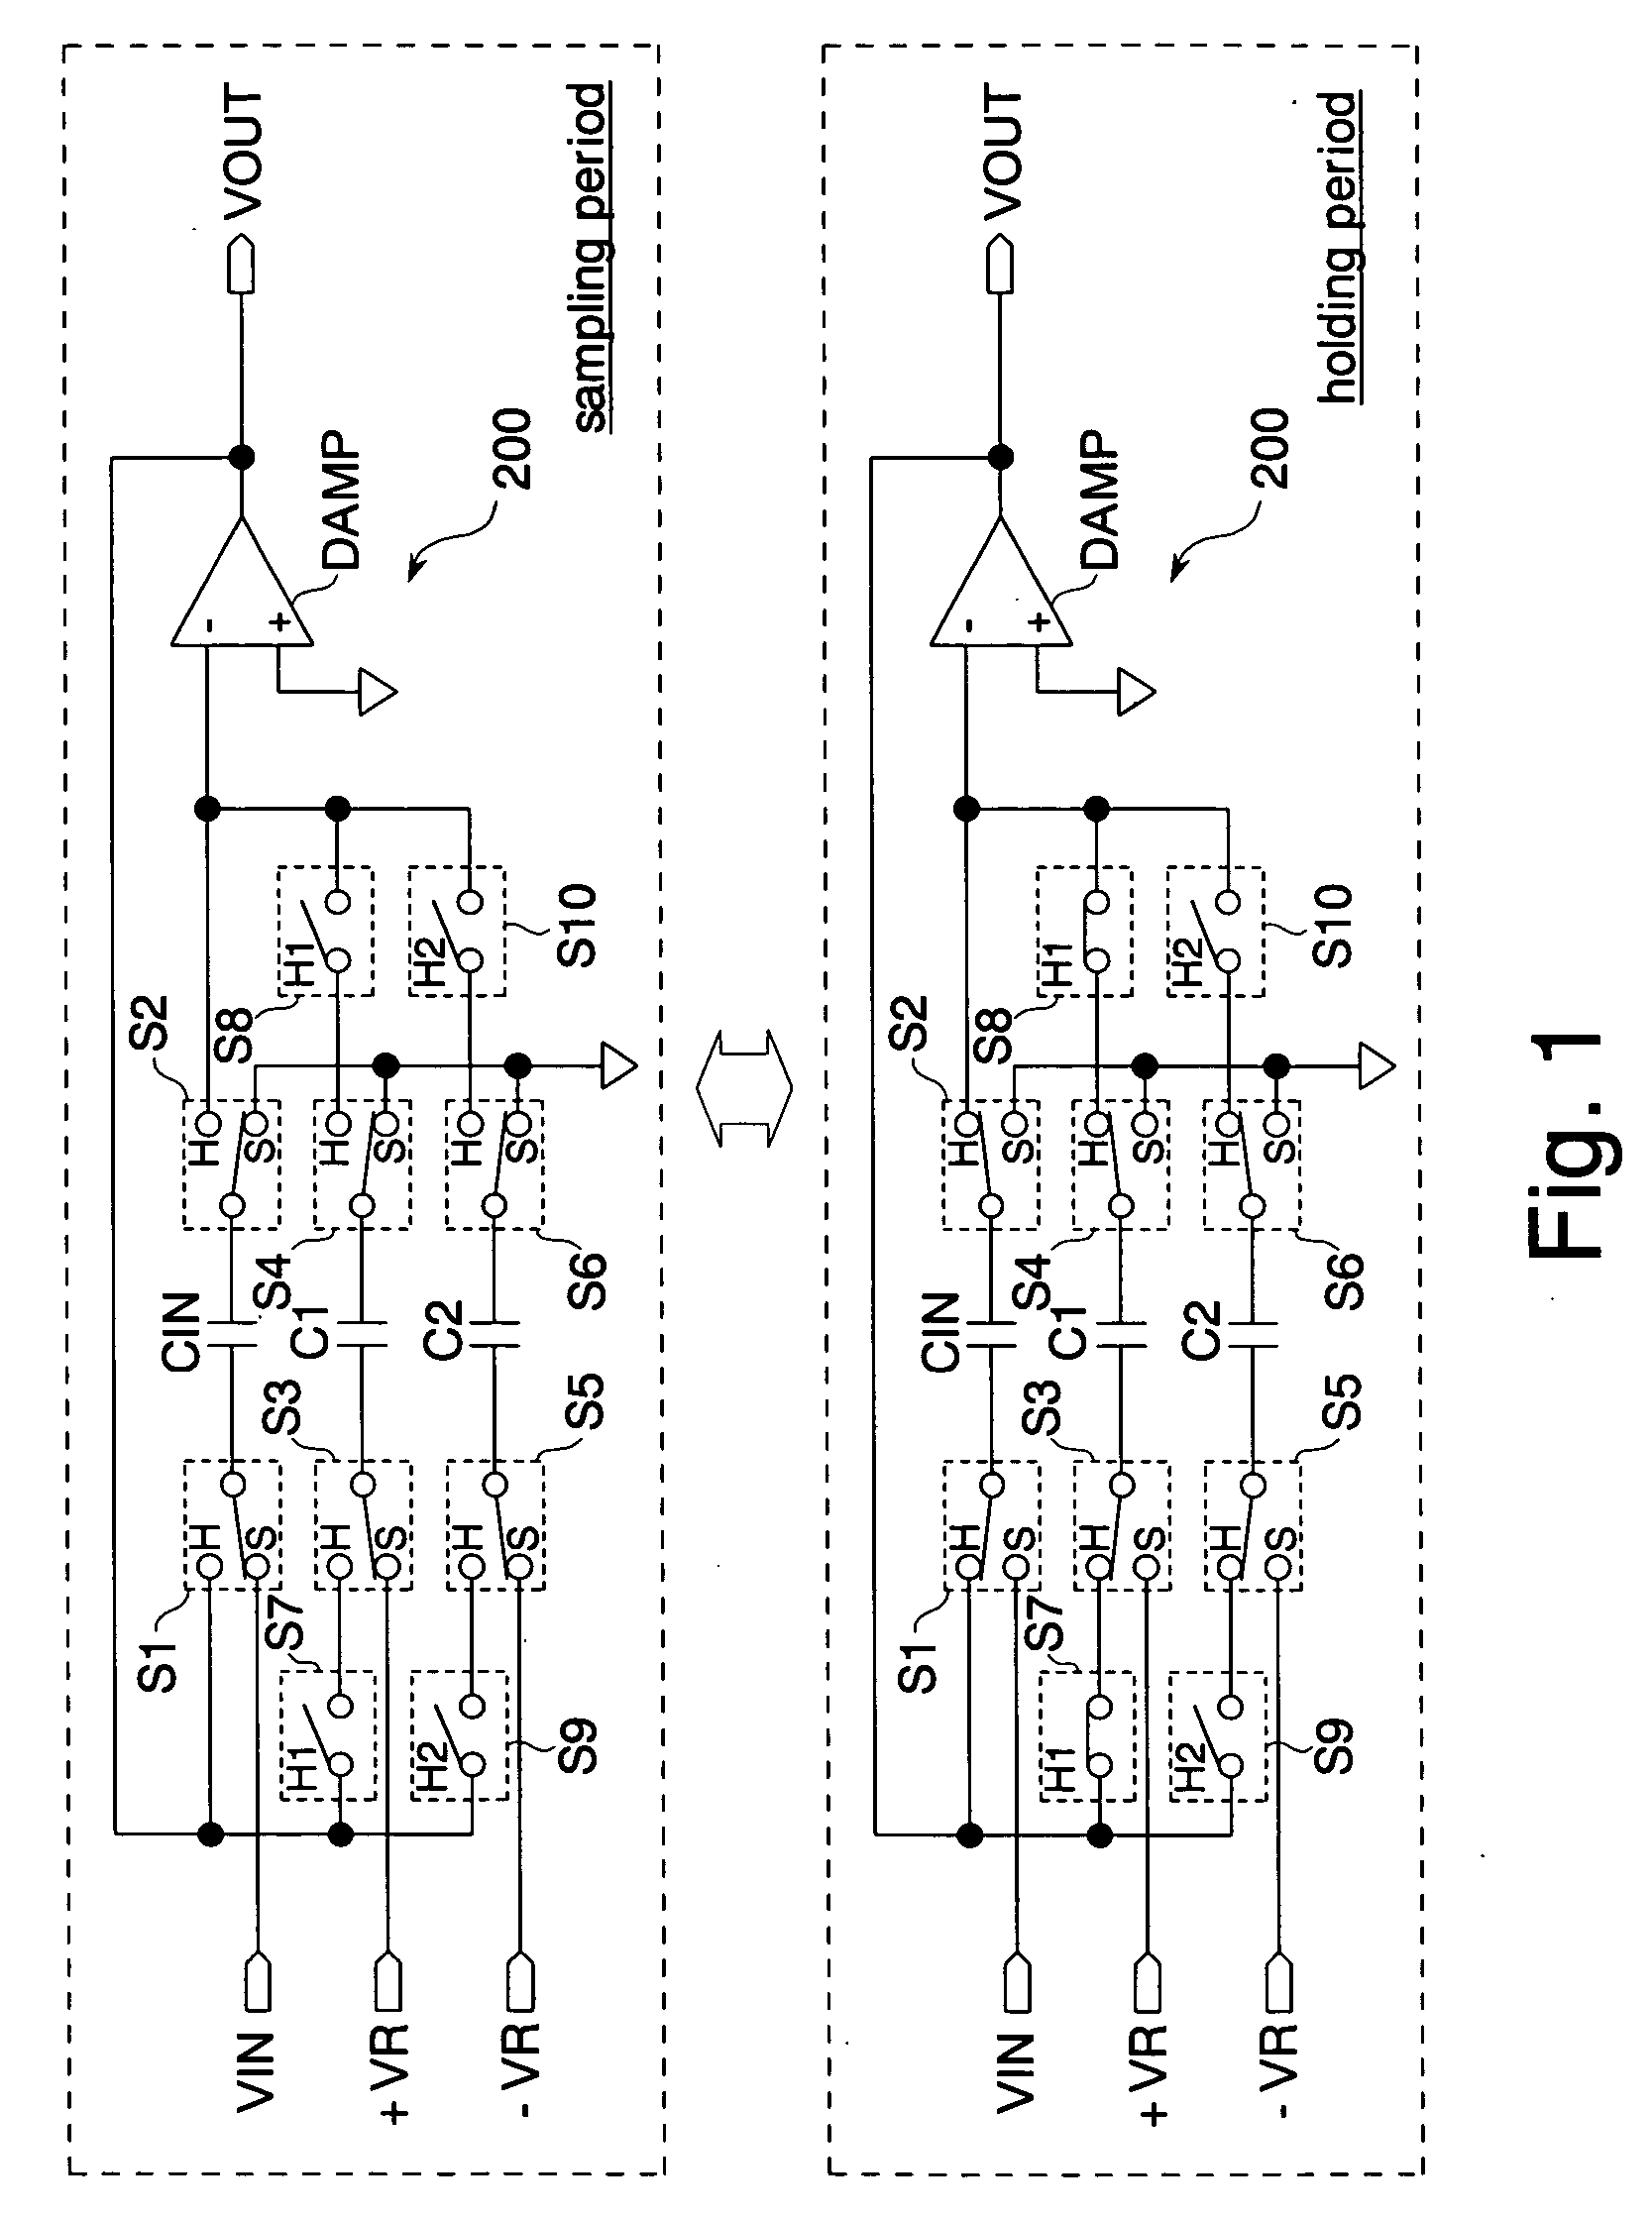 Switched-capacitor circuit and pipelined a/d converter